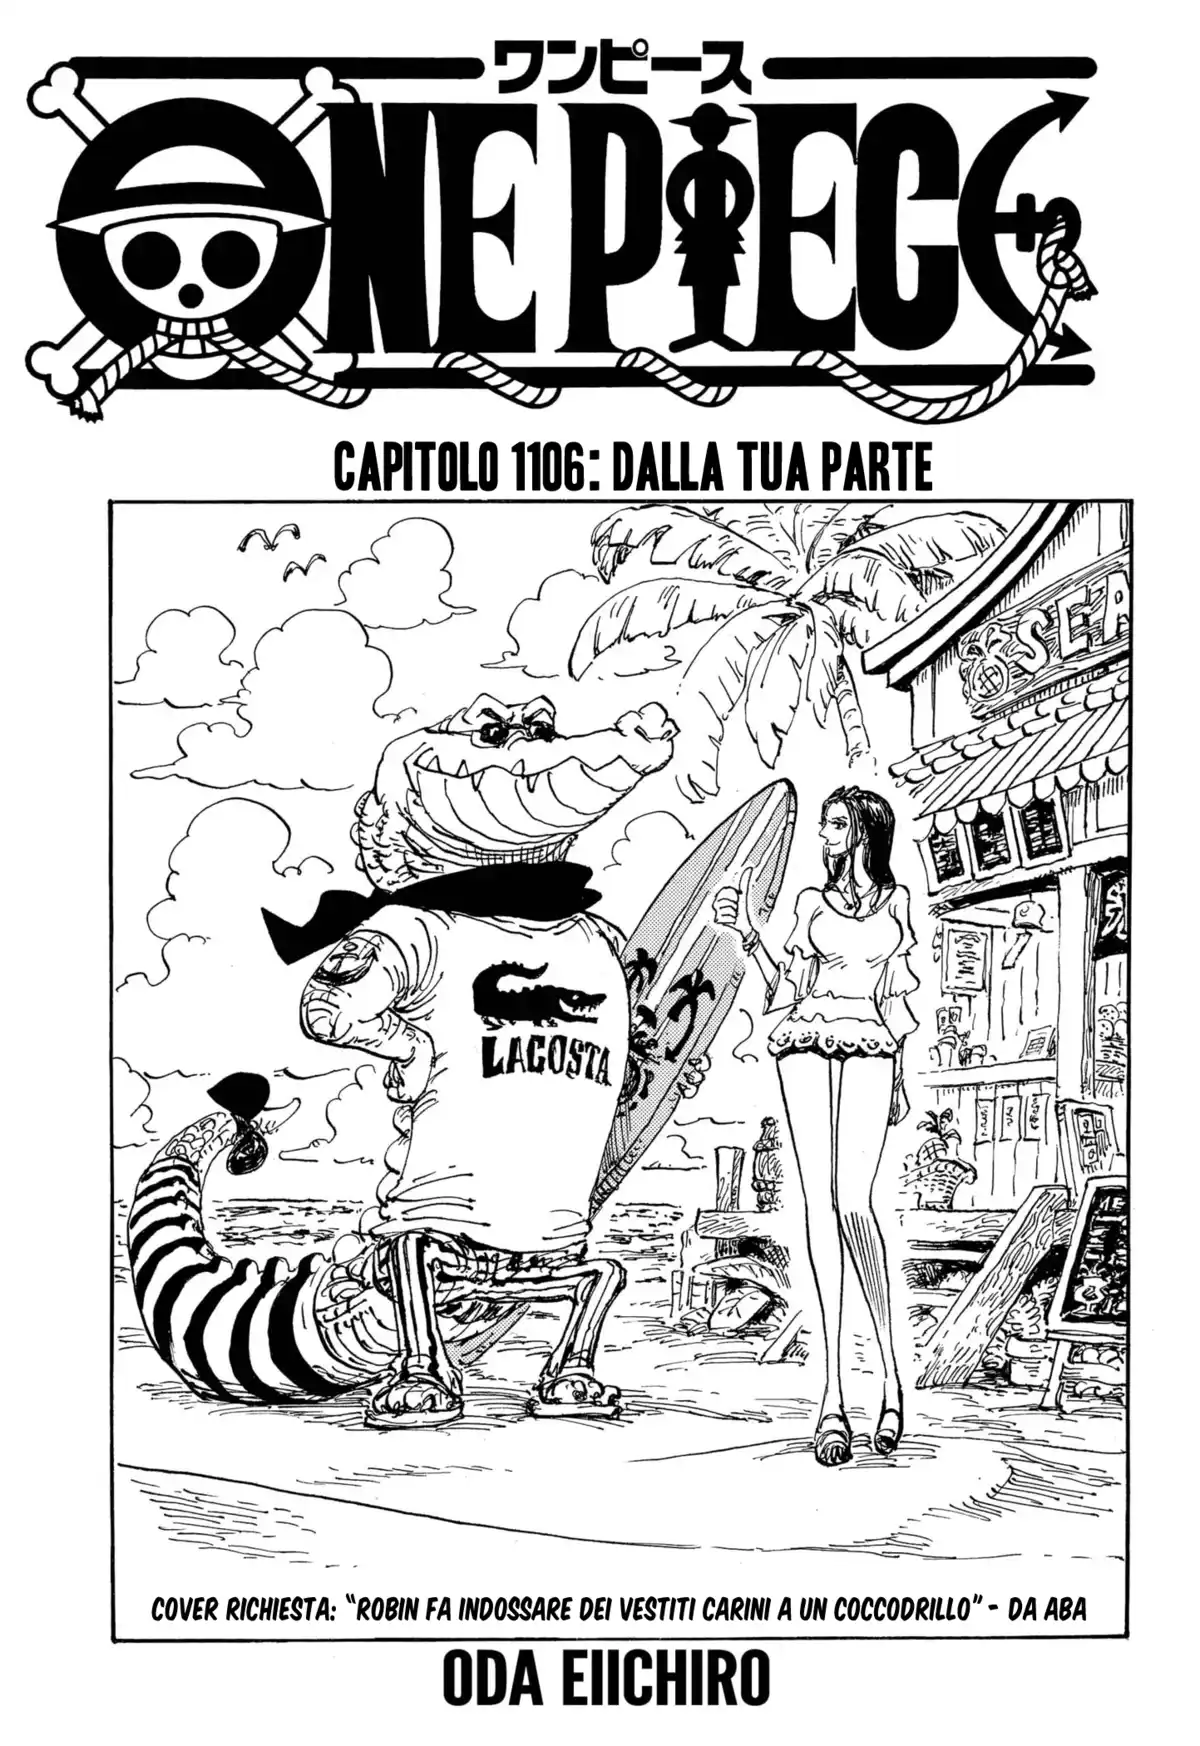 One Piece Capitolo 1106 page 2